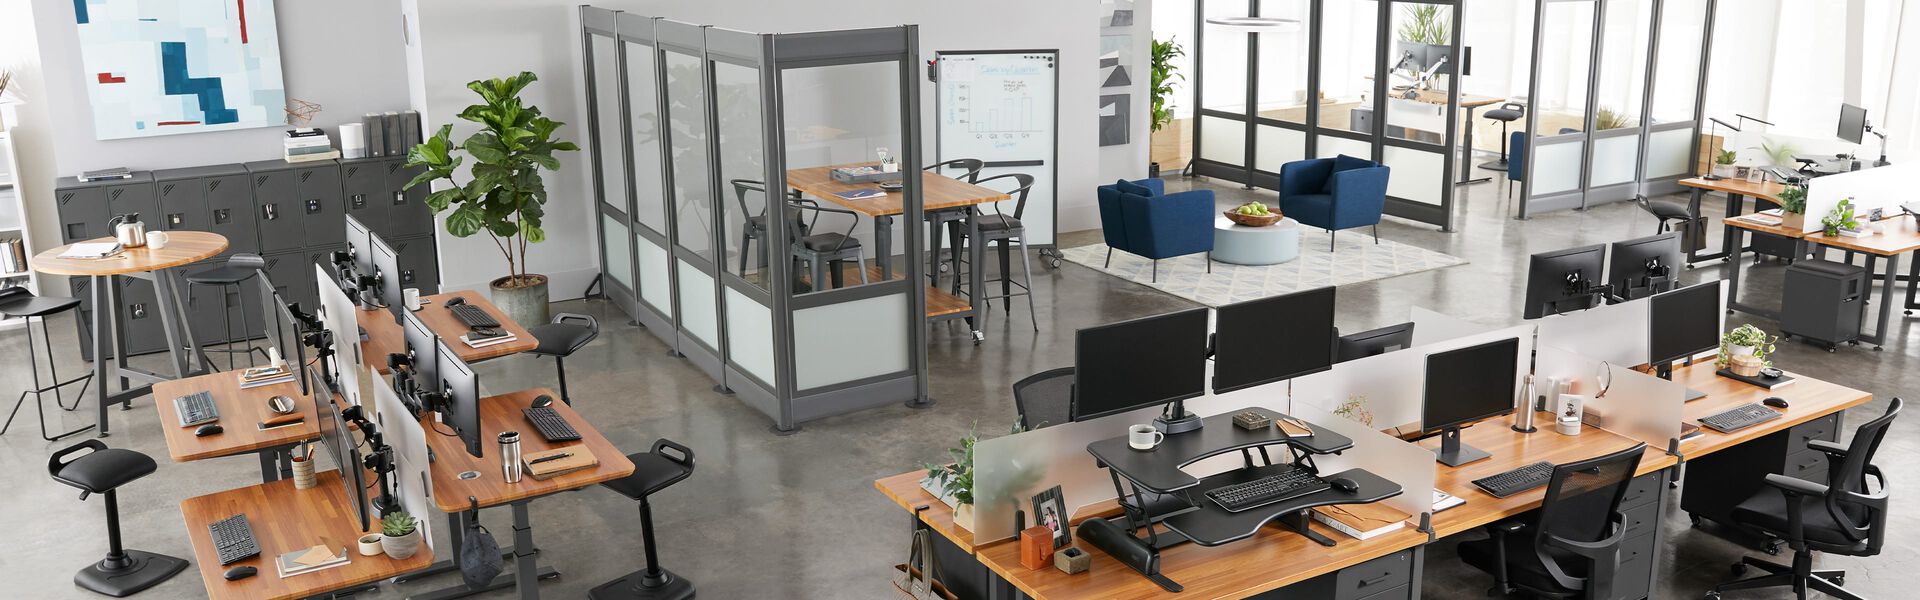 Open office as seen from above with Vari product